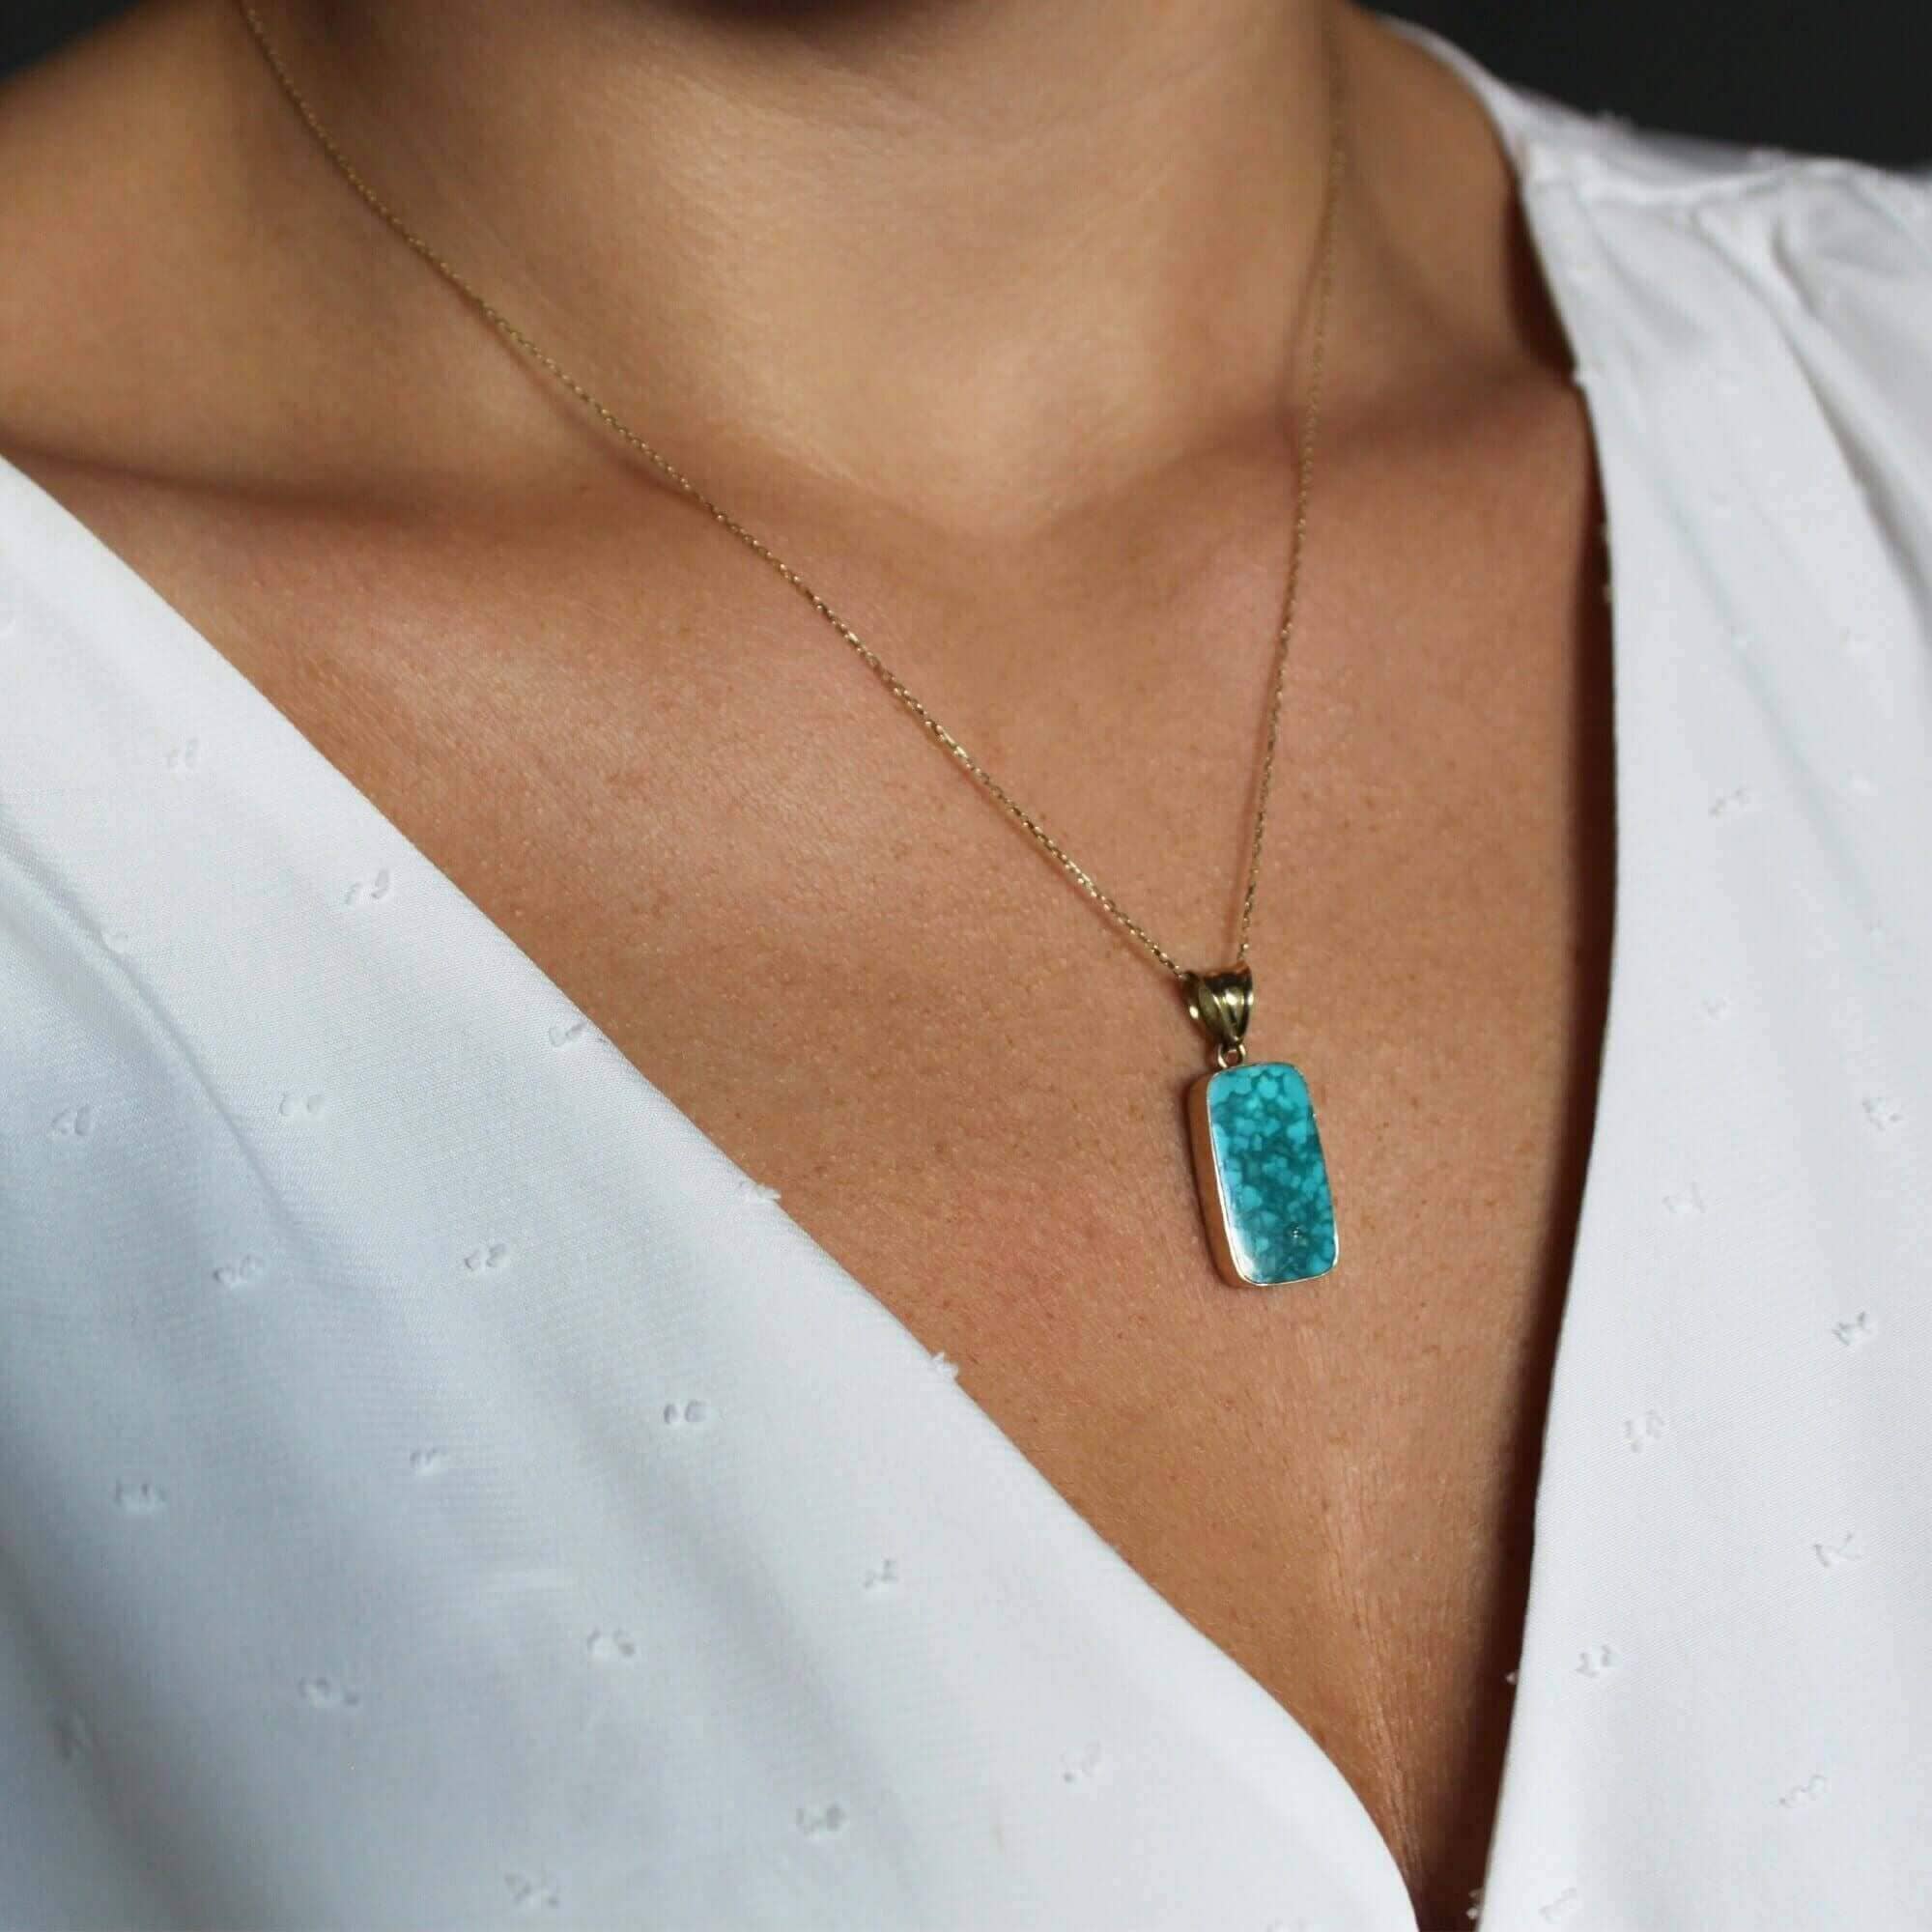 Stunning Turquoise Necklace Ideas for Every Occasion